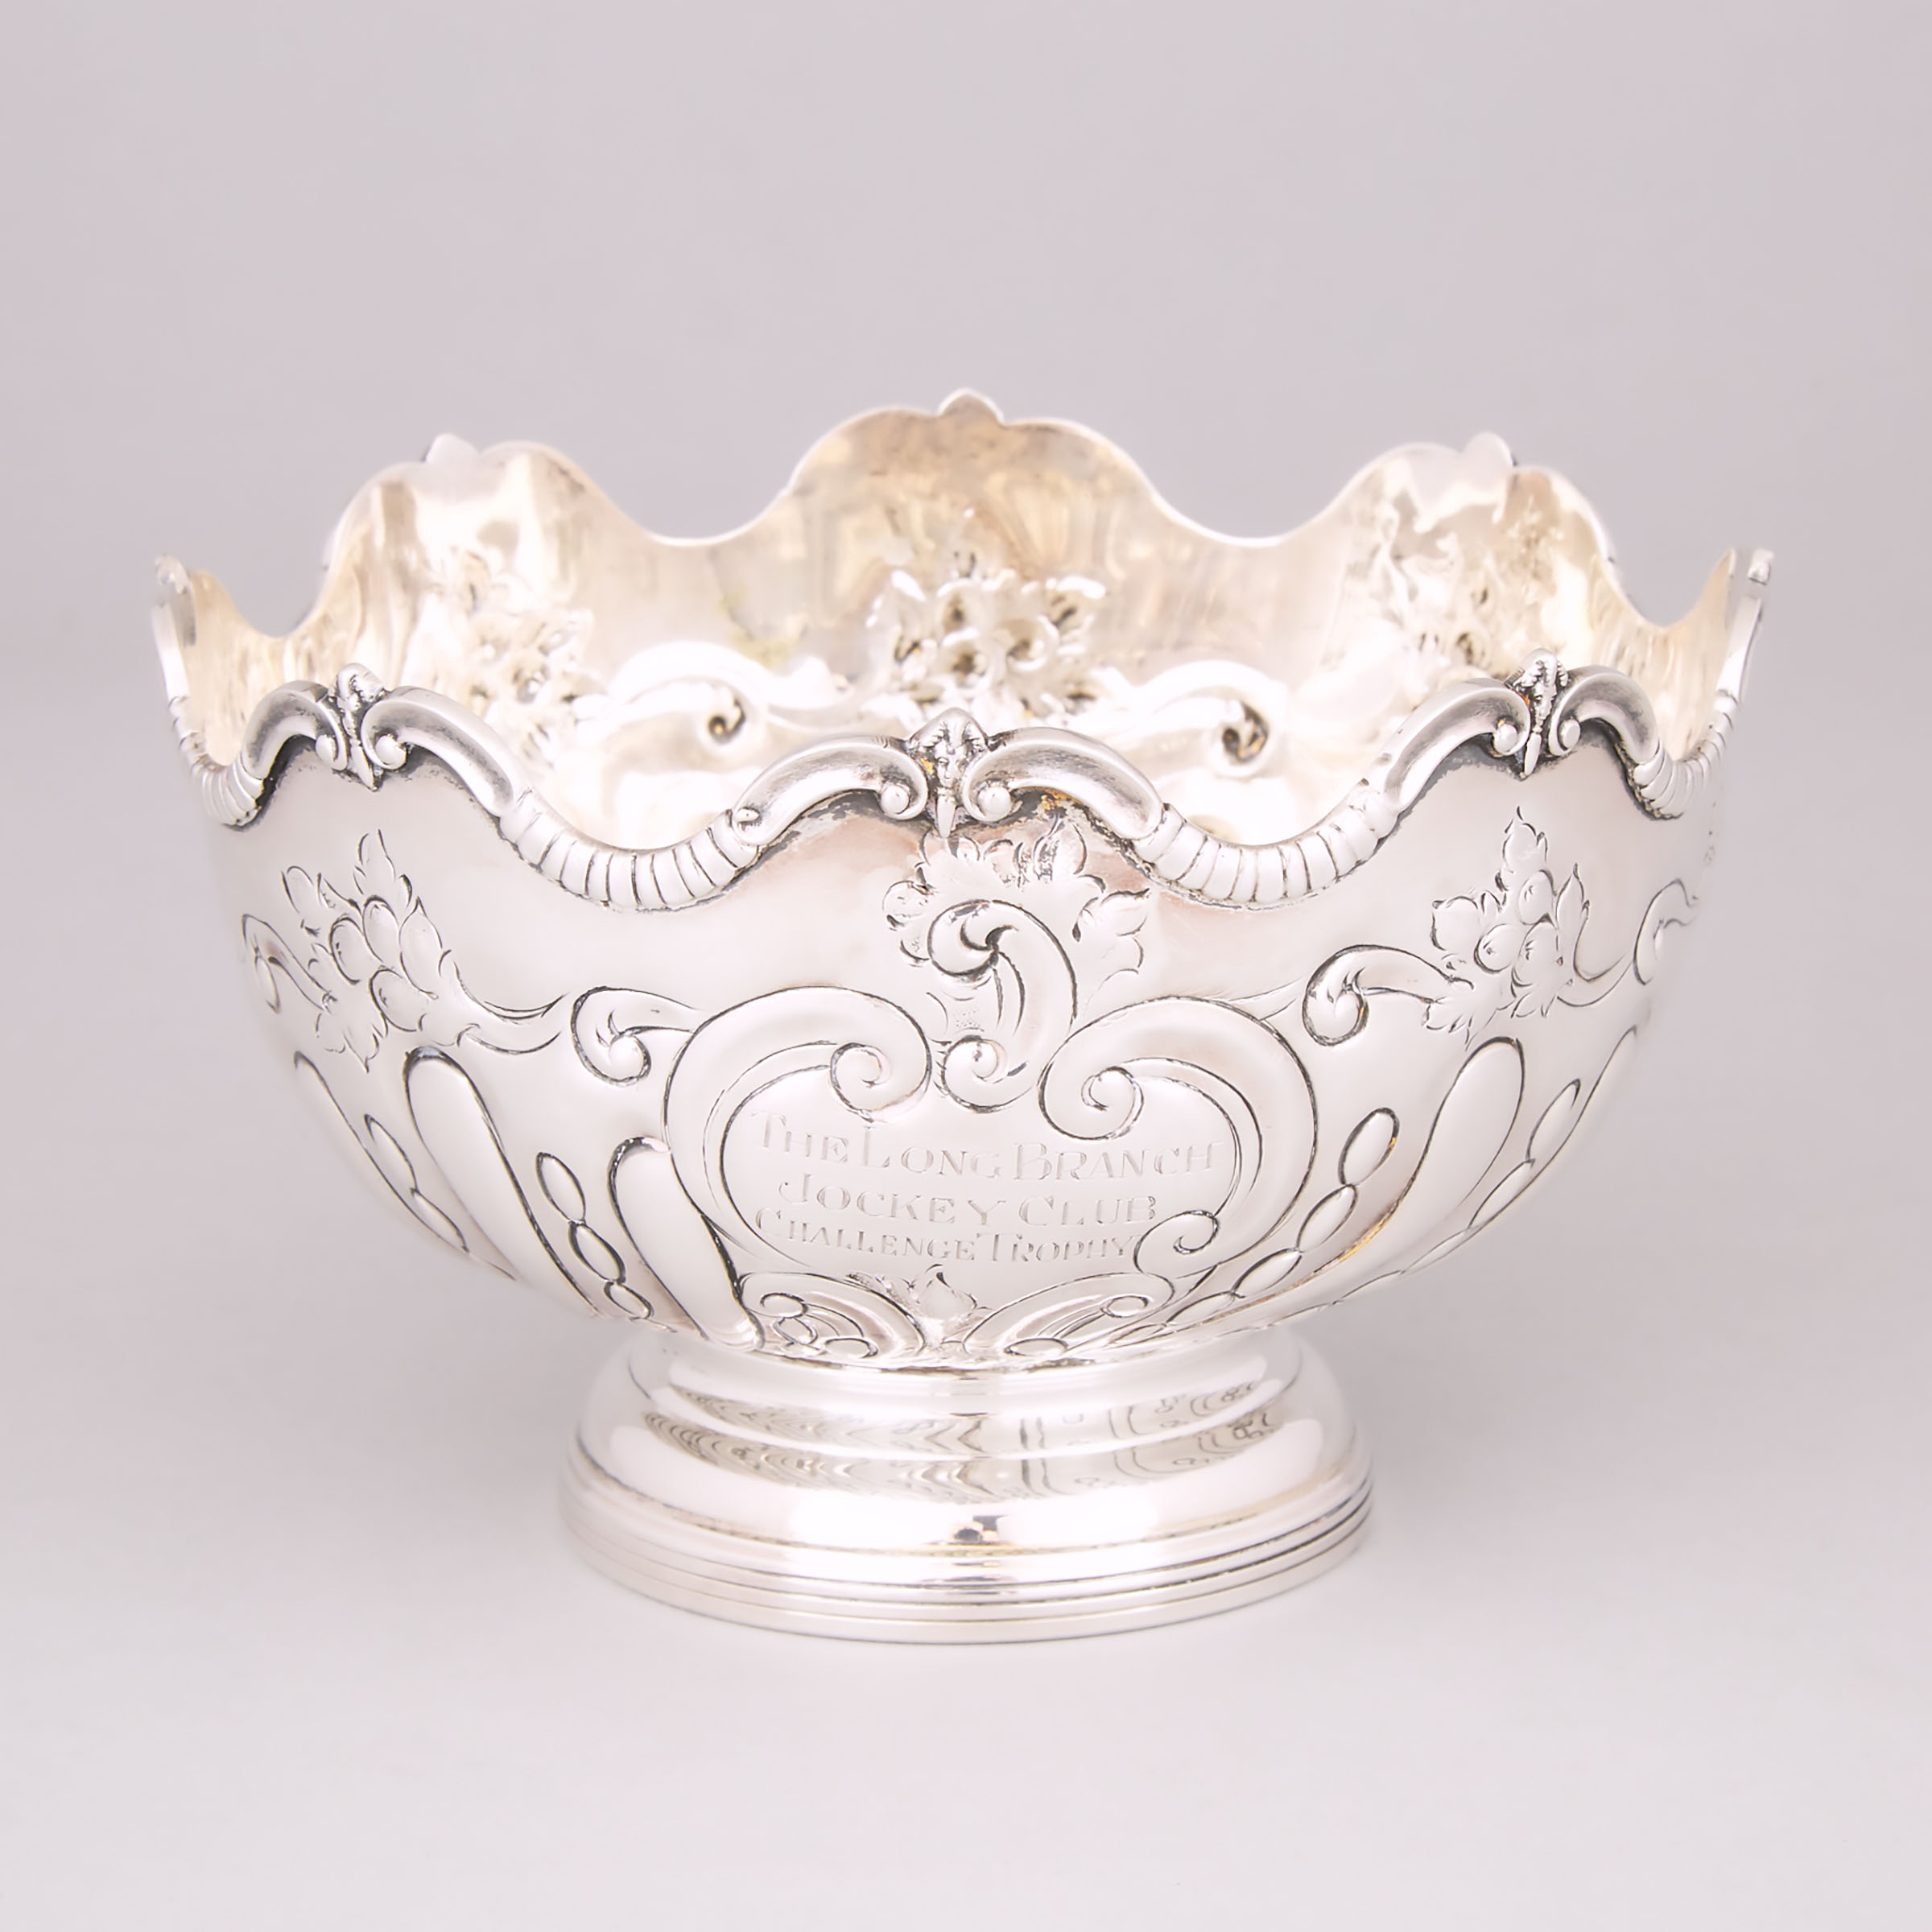 Canadian Silver Bowl, Henry Birks & Sons, Montreal, Que., 1904-24